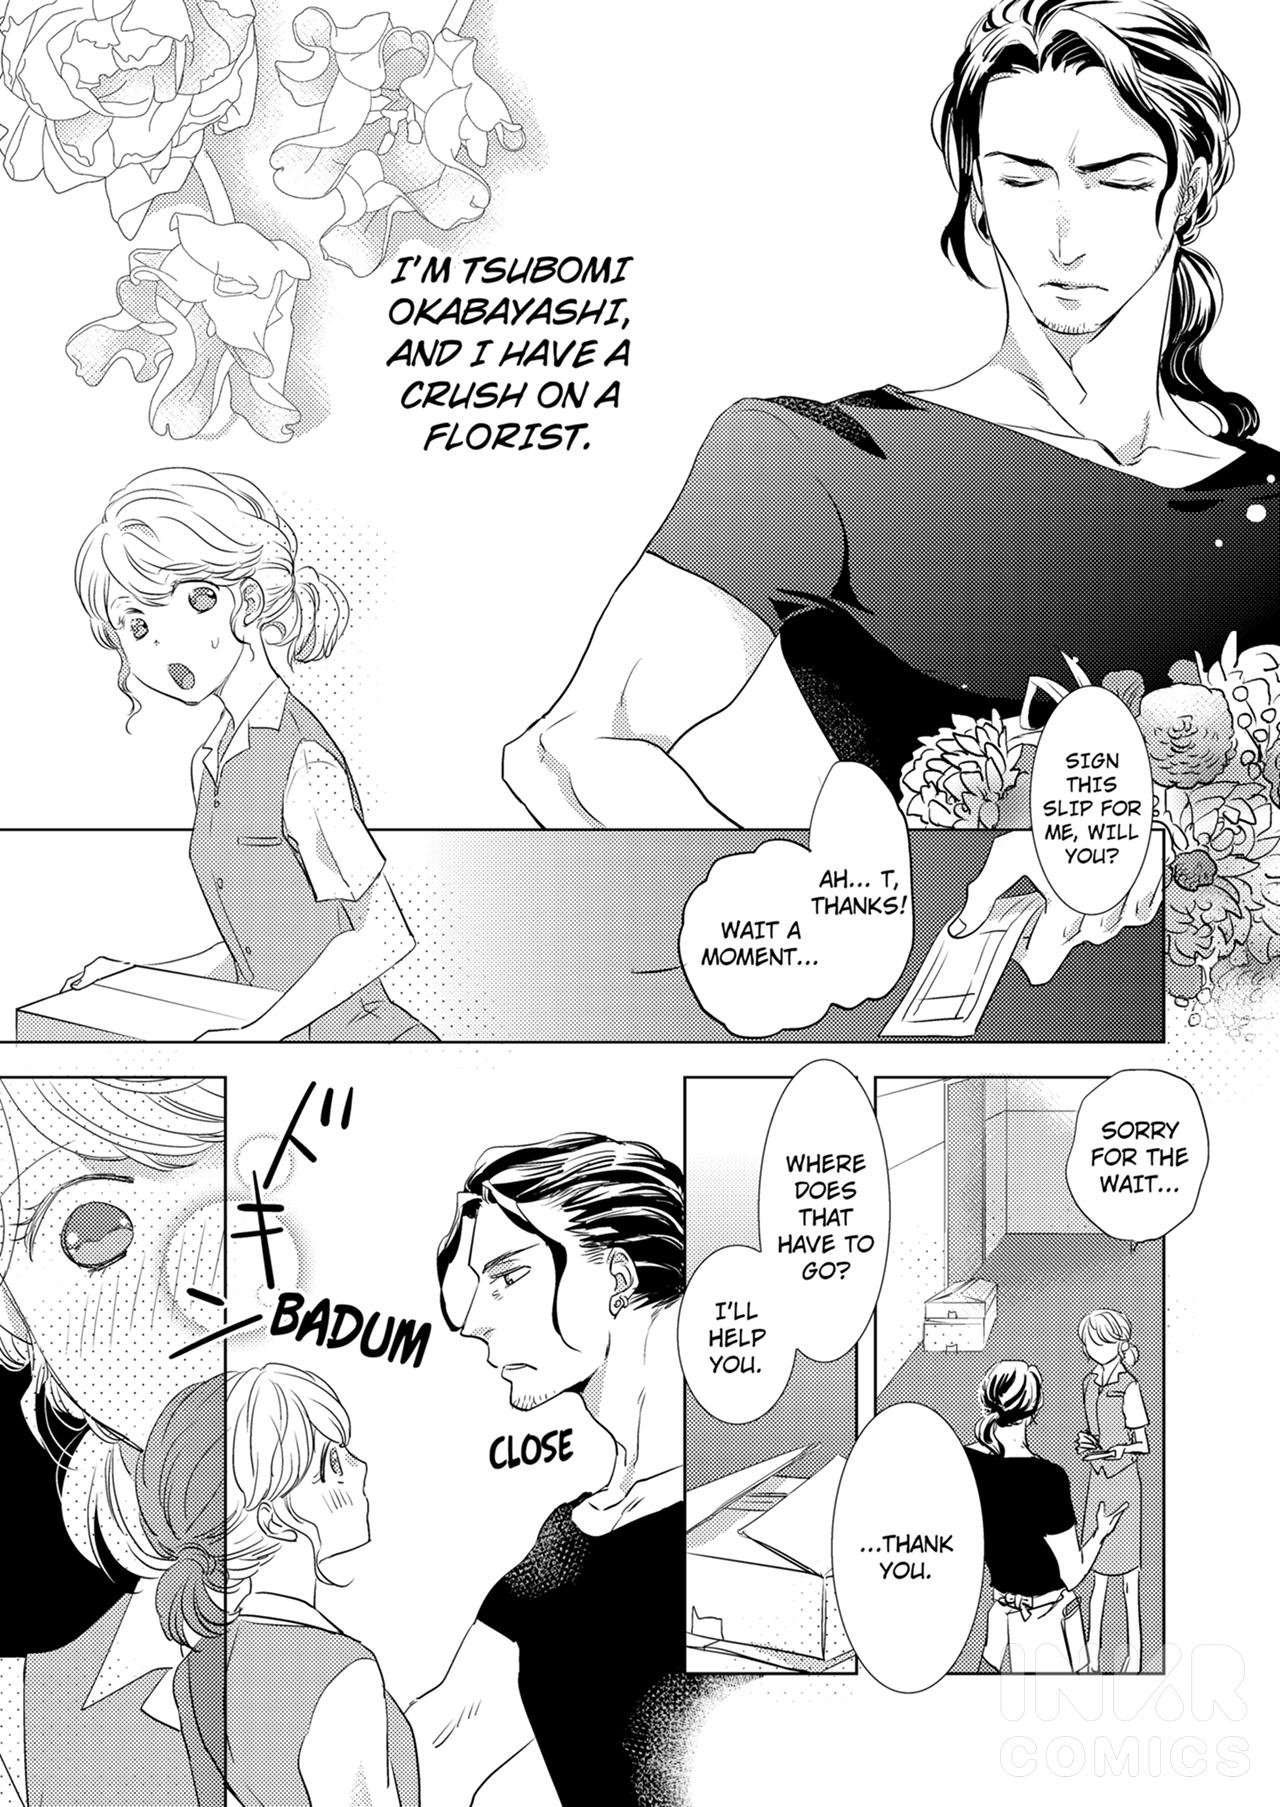 The Bud And The Florist - First Time I Wet Myself With Your Fingers... - Page 2